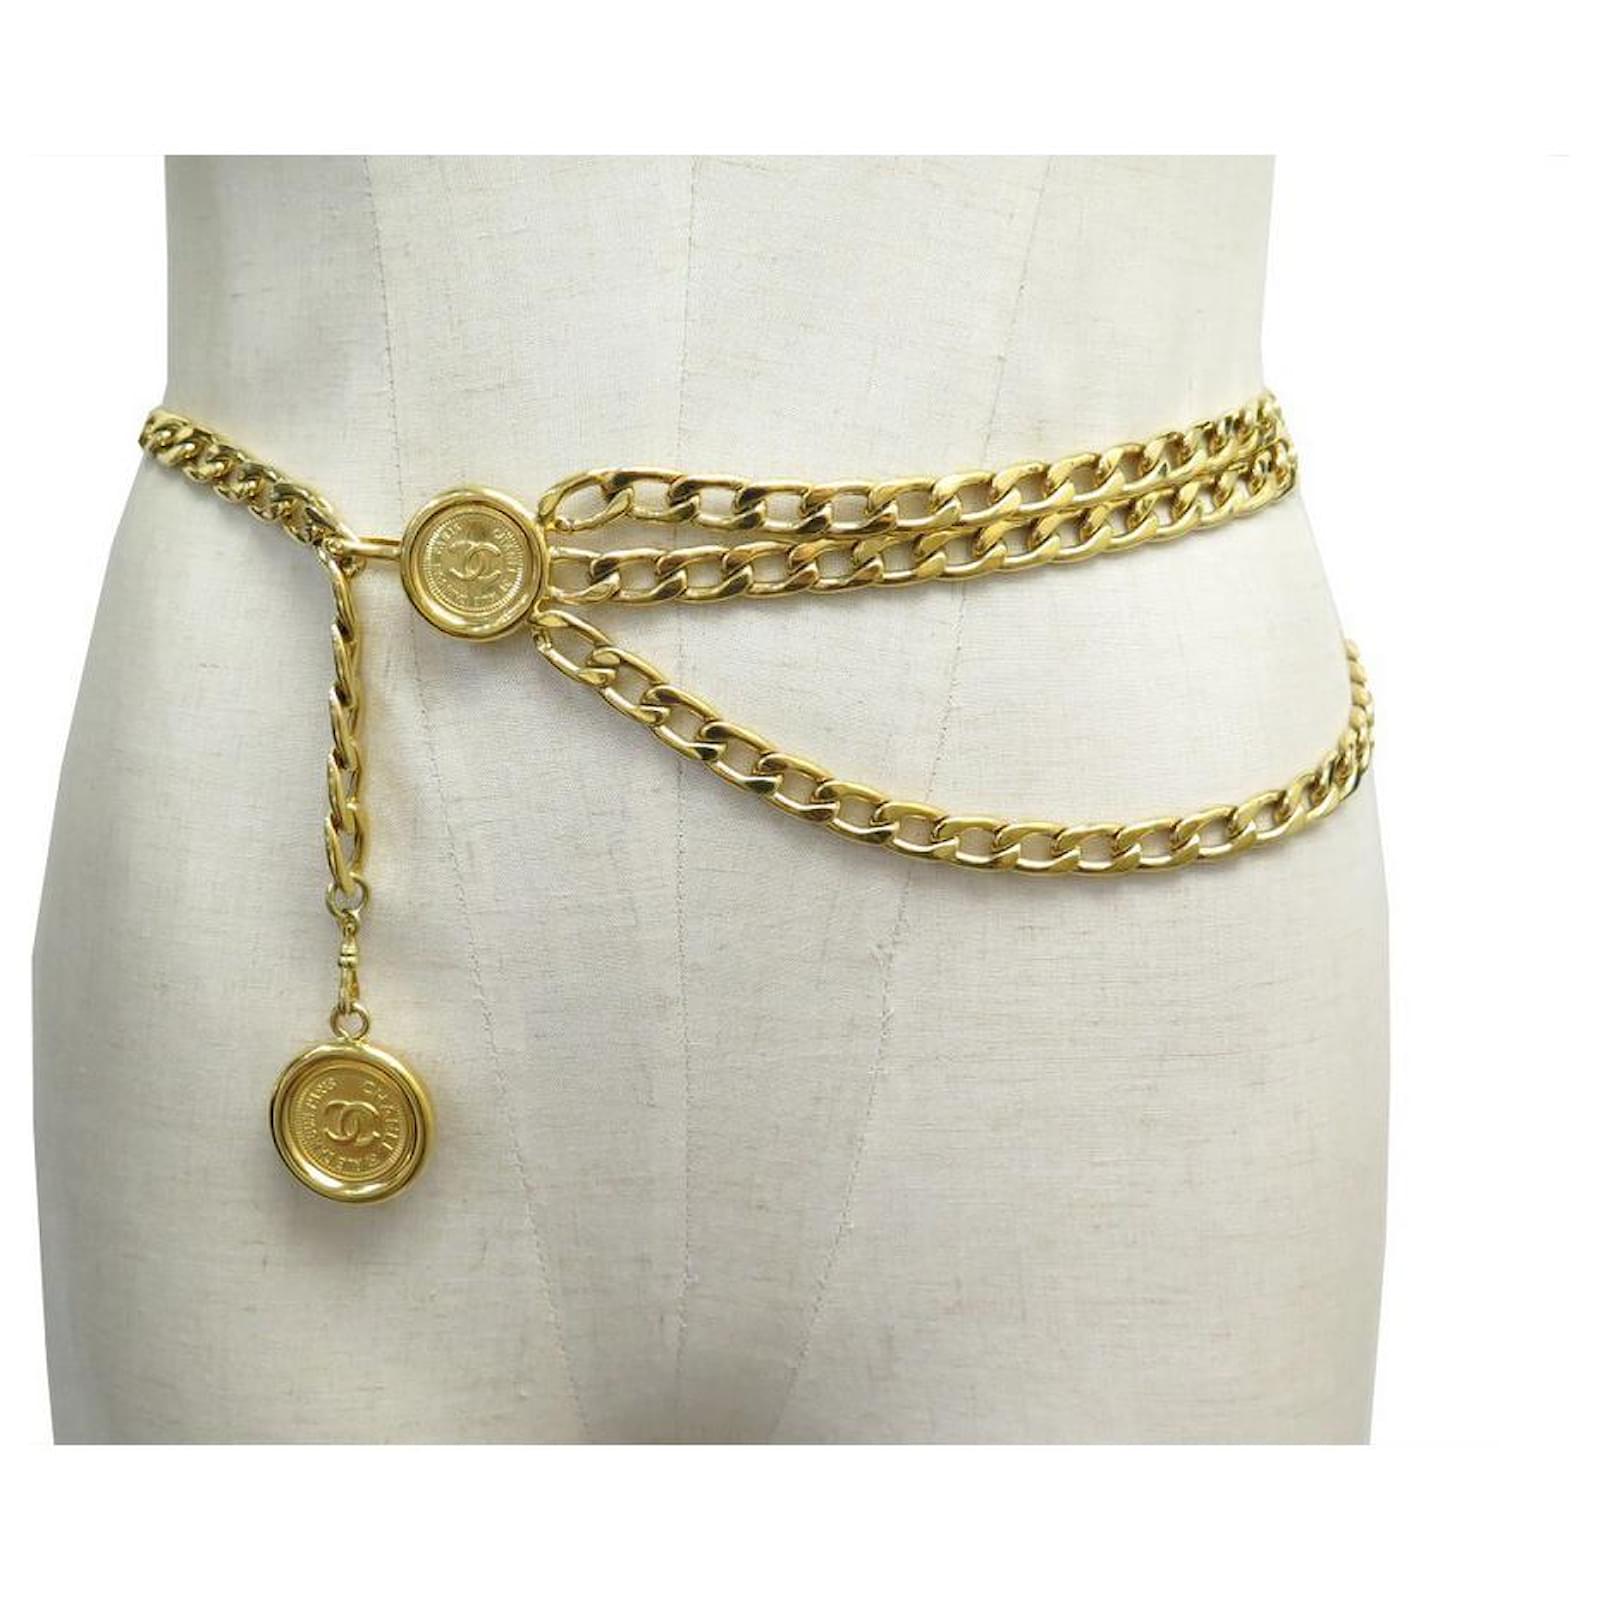 MINT. Vintage CHANEL Thick Chain Belt With Golden Mademoiselle -  Norway